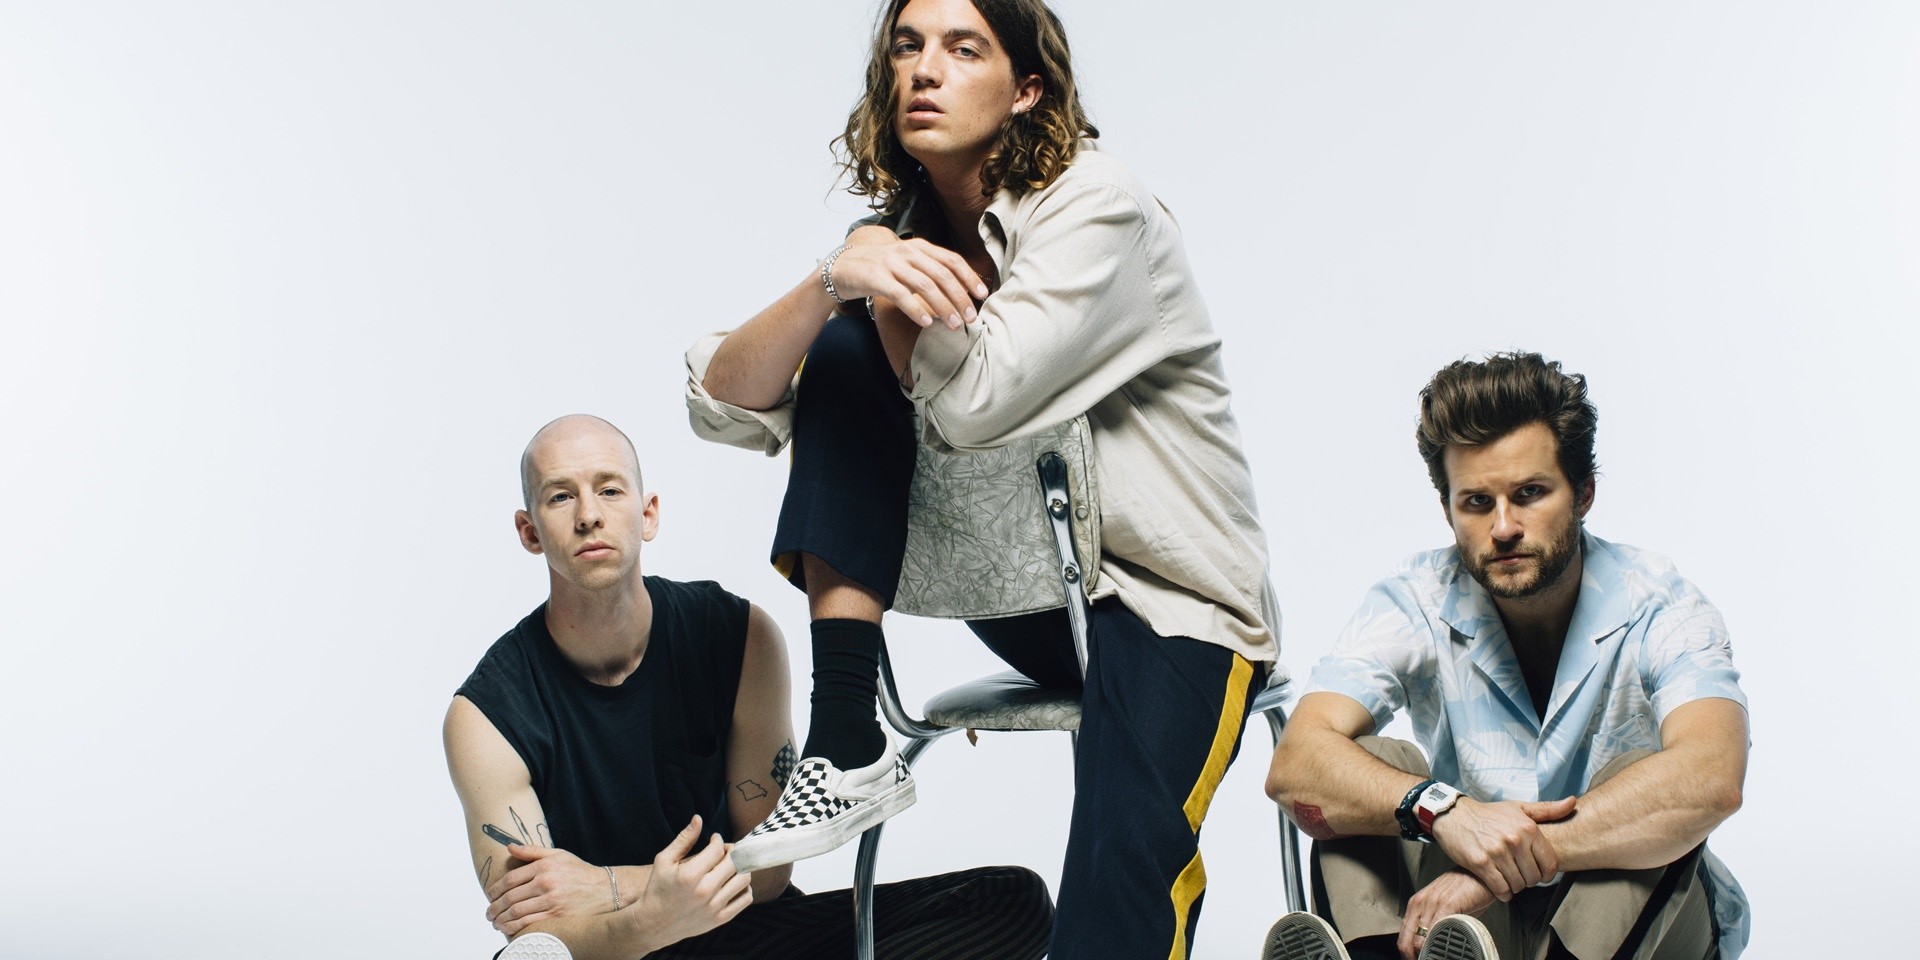 More standing tickets released for LANY's show in Singapore